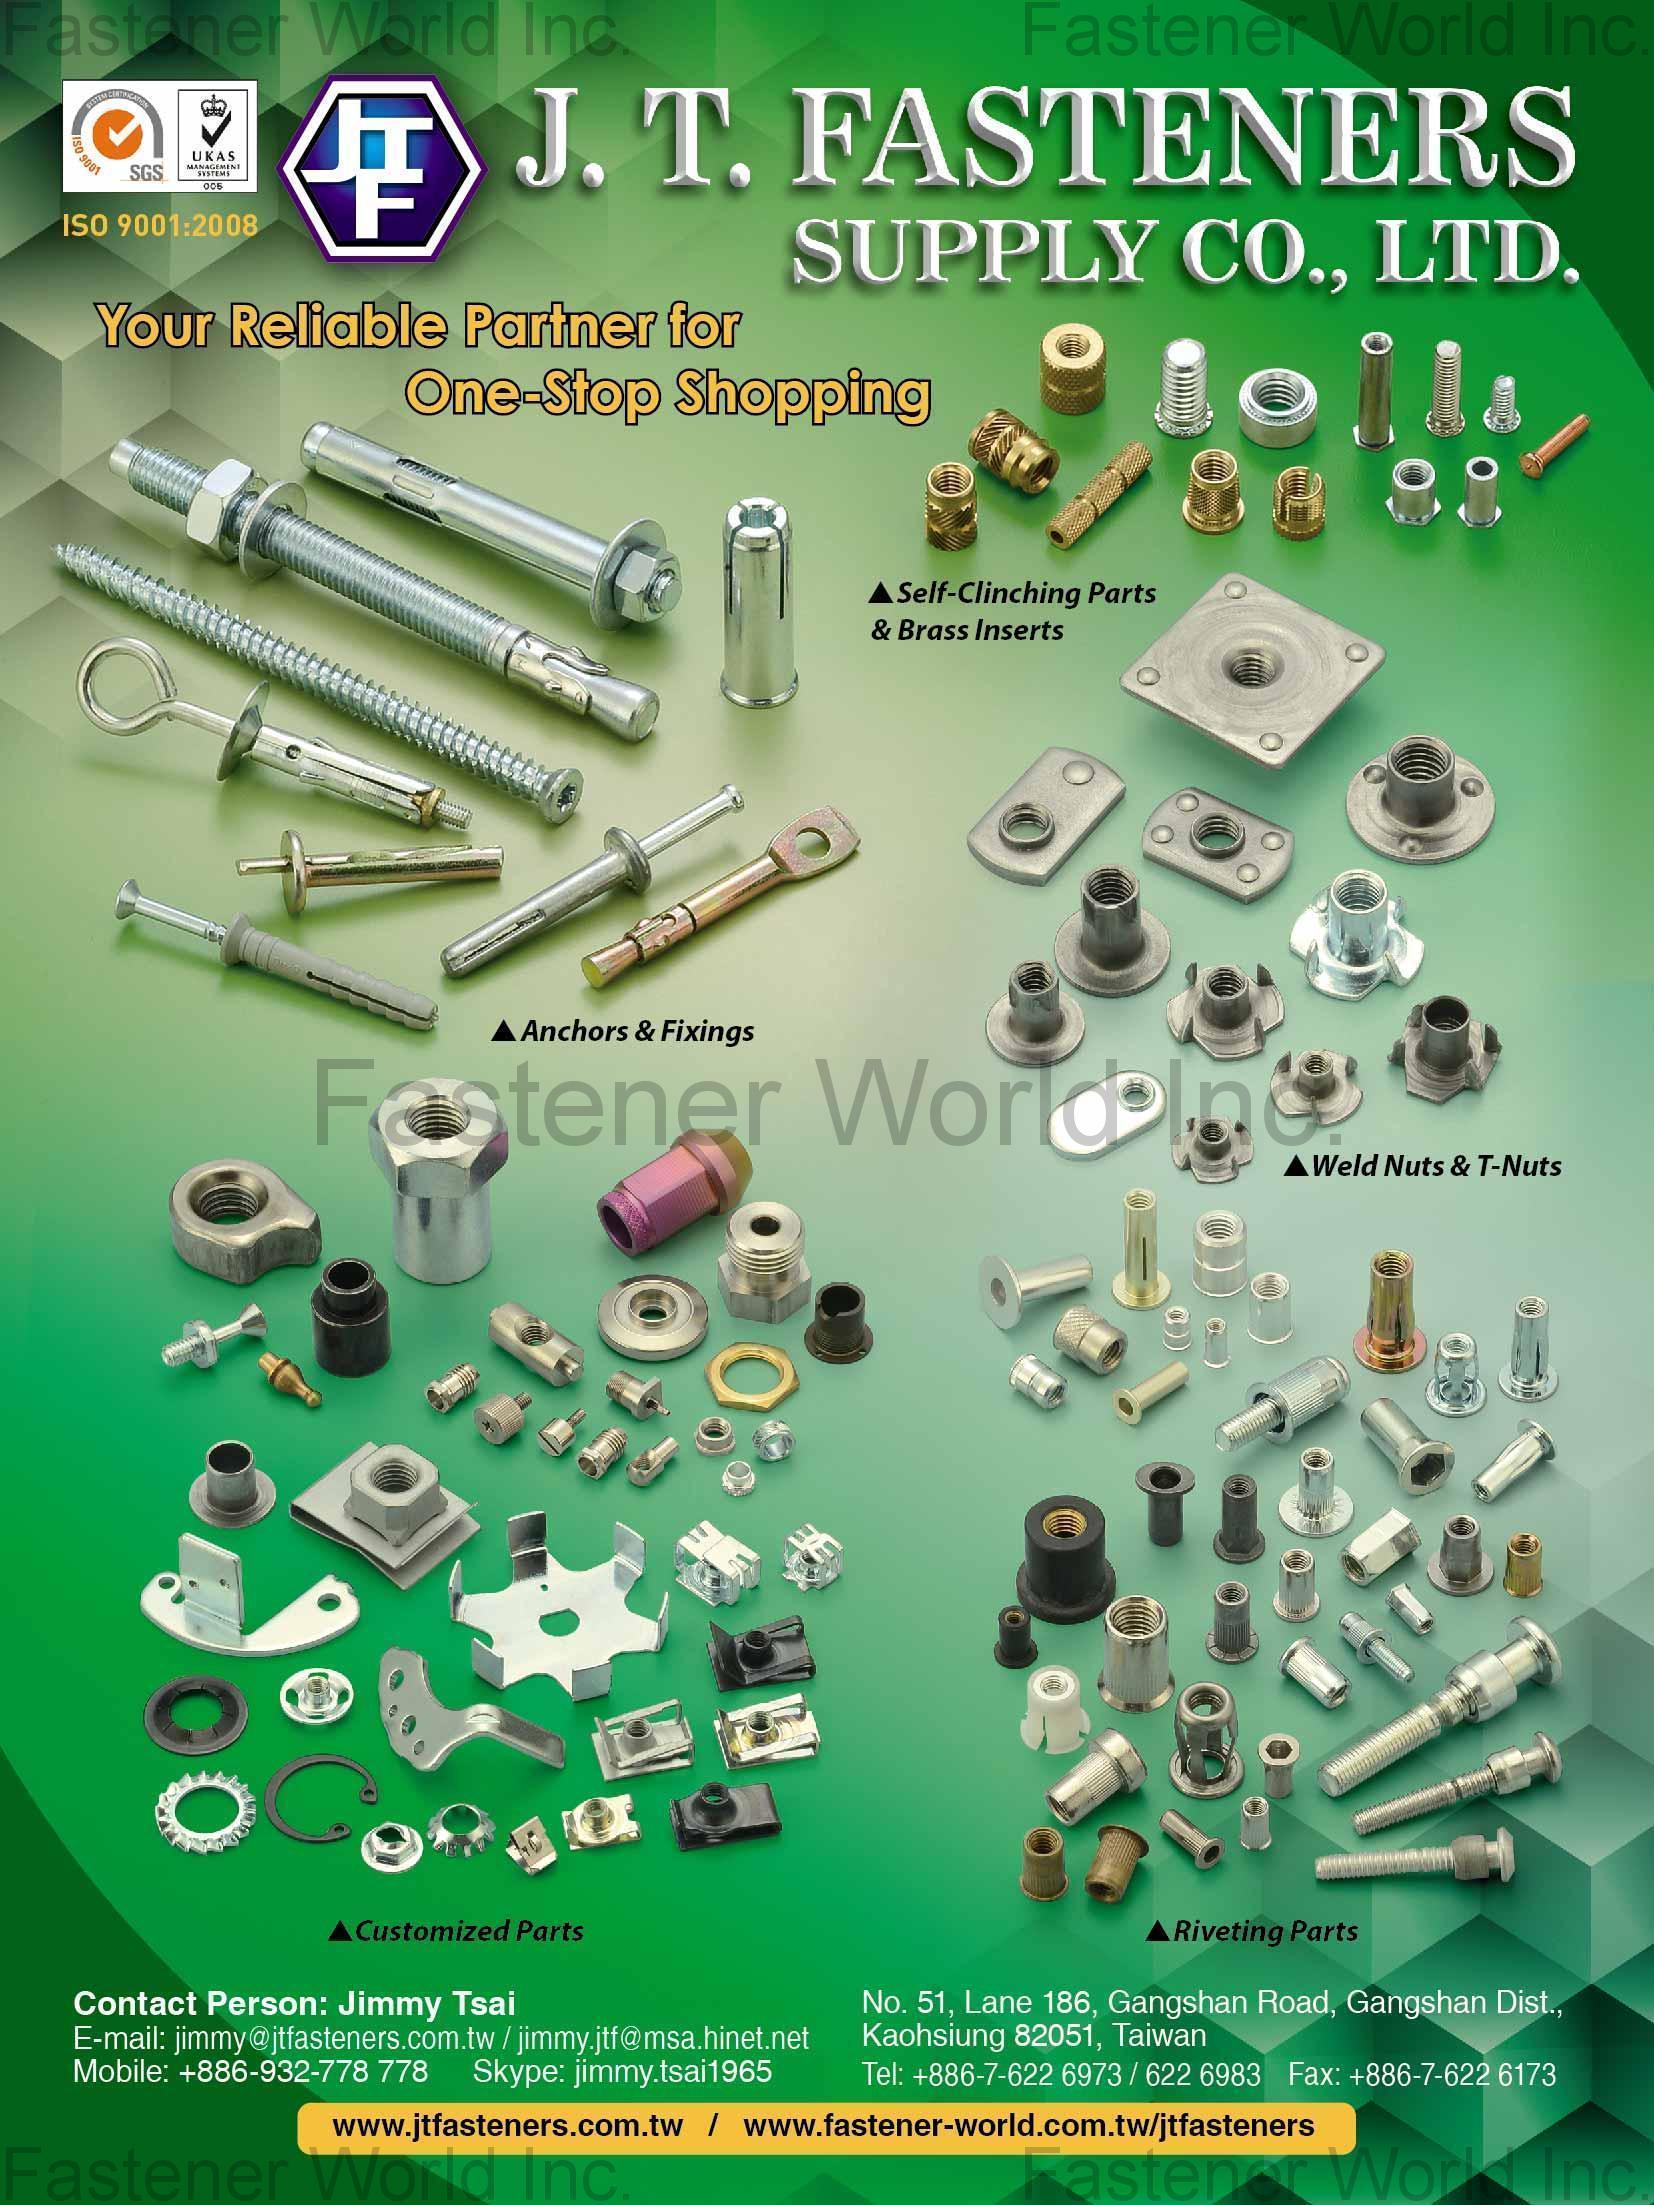 J. T. FASTENERS SUPPLY CO., LTD.  , Self-Clinching Parts & Brass Inserts, Anchors & Fixings, Weld Nuts & T-Nuts, Customized Parts, Riveting Parts , Stamped Parts